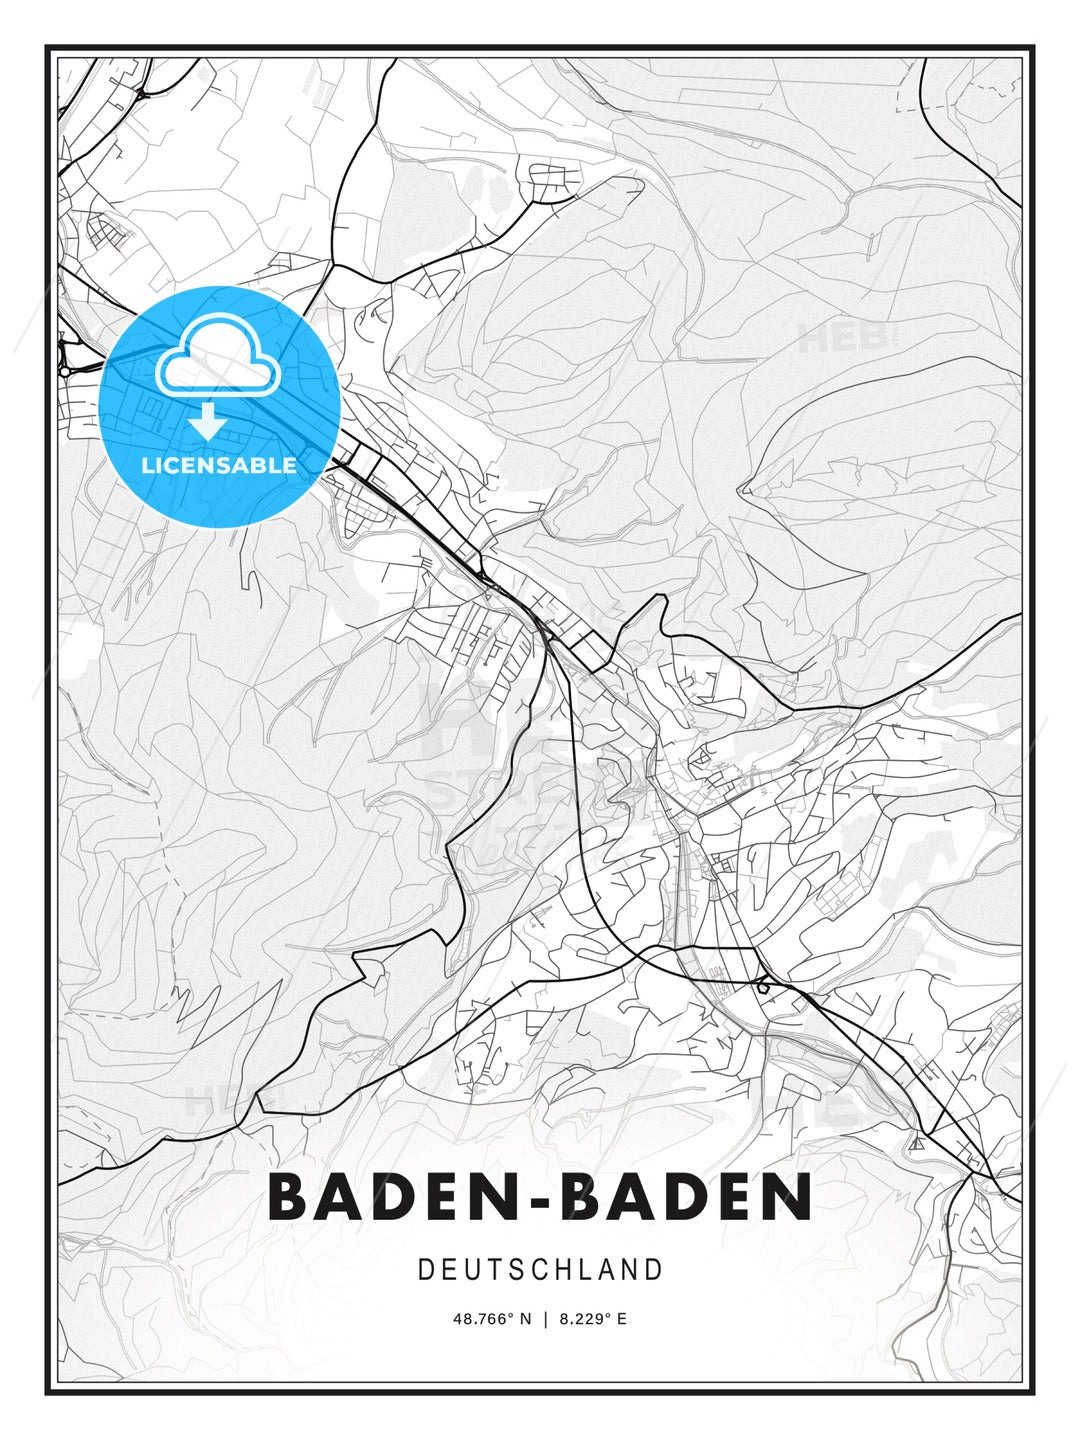 Baden-Baden, Germany, Modern Print Template in Various Formats - HEBSTREITS Sketches